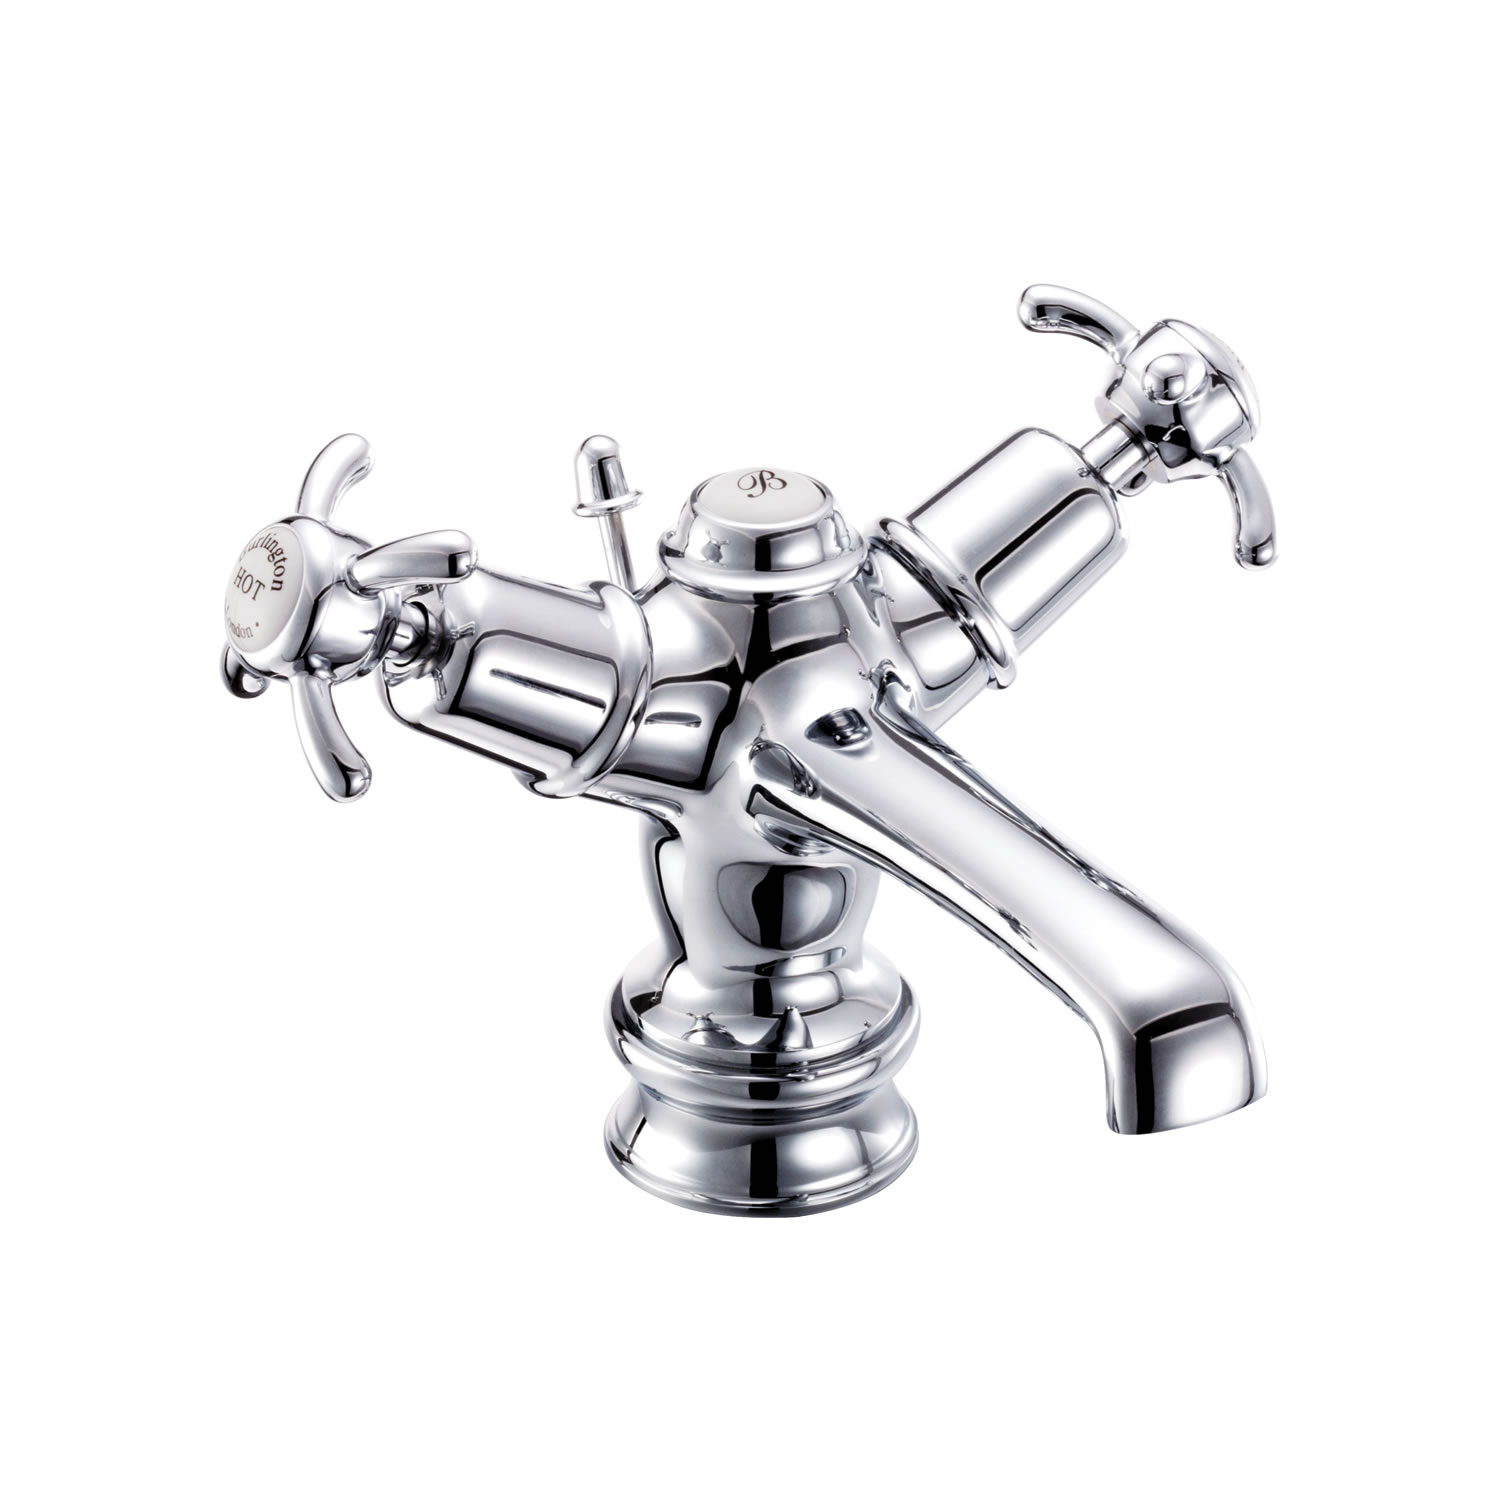 Anglesey Regent basin mixer with low central indice with pop-up waste